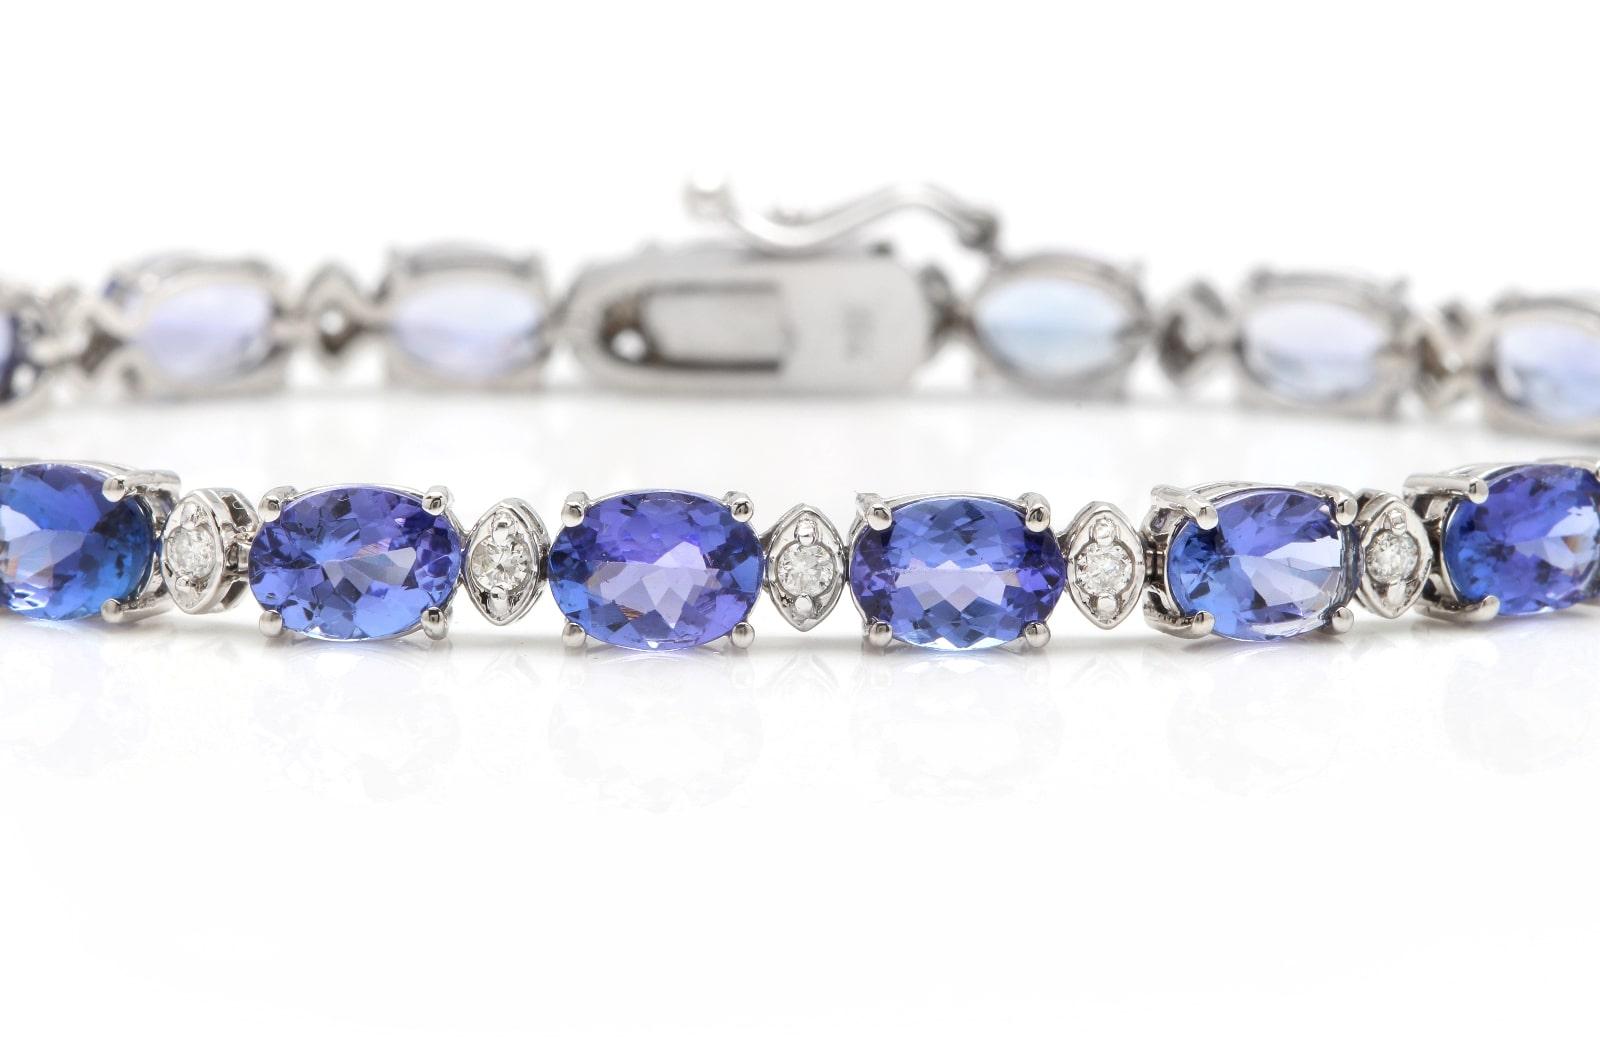 Very Impressive 22.60 Carats Natural Tanzanite & Diamond 14K Solid White Gold Bracelet 

Suggested Replacement Value: $9,000.00

STAMPED: 14K

Total Natural Round Diamonds Weight: Approx. 0.60 Carats (color G-H / Clarity SI1-SI2)

Total Natural